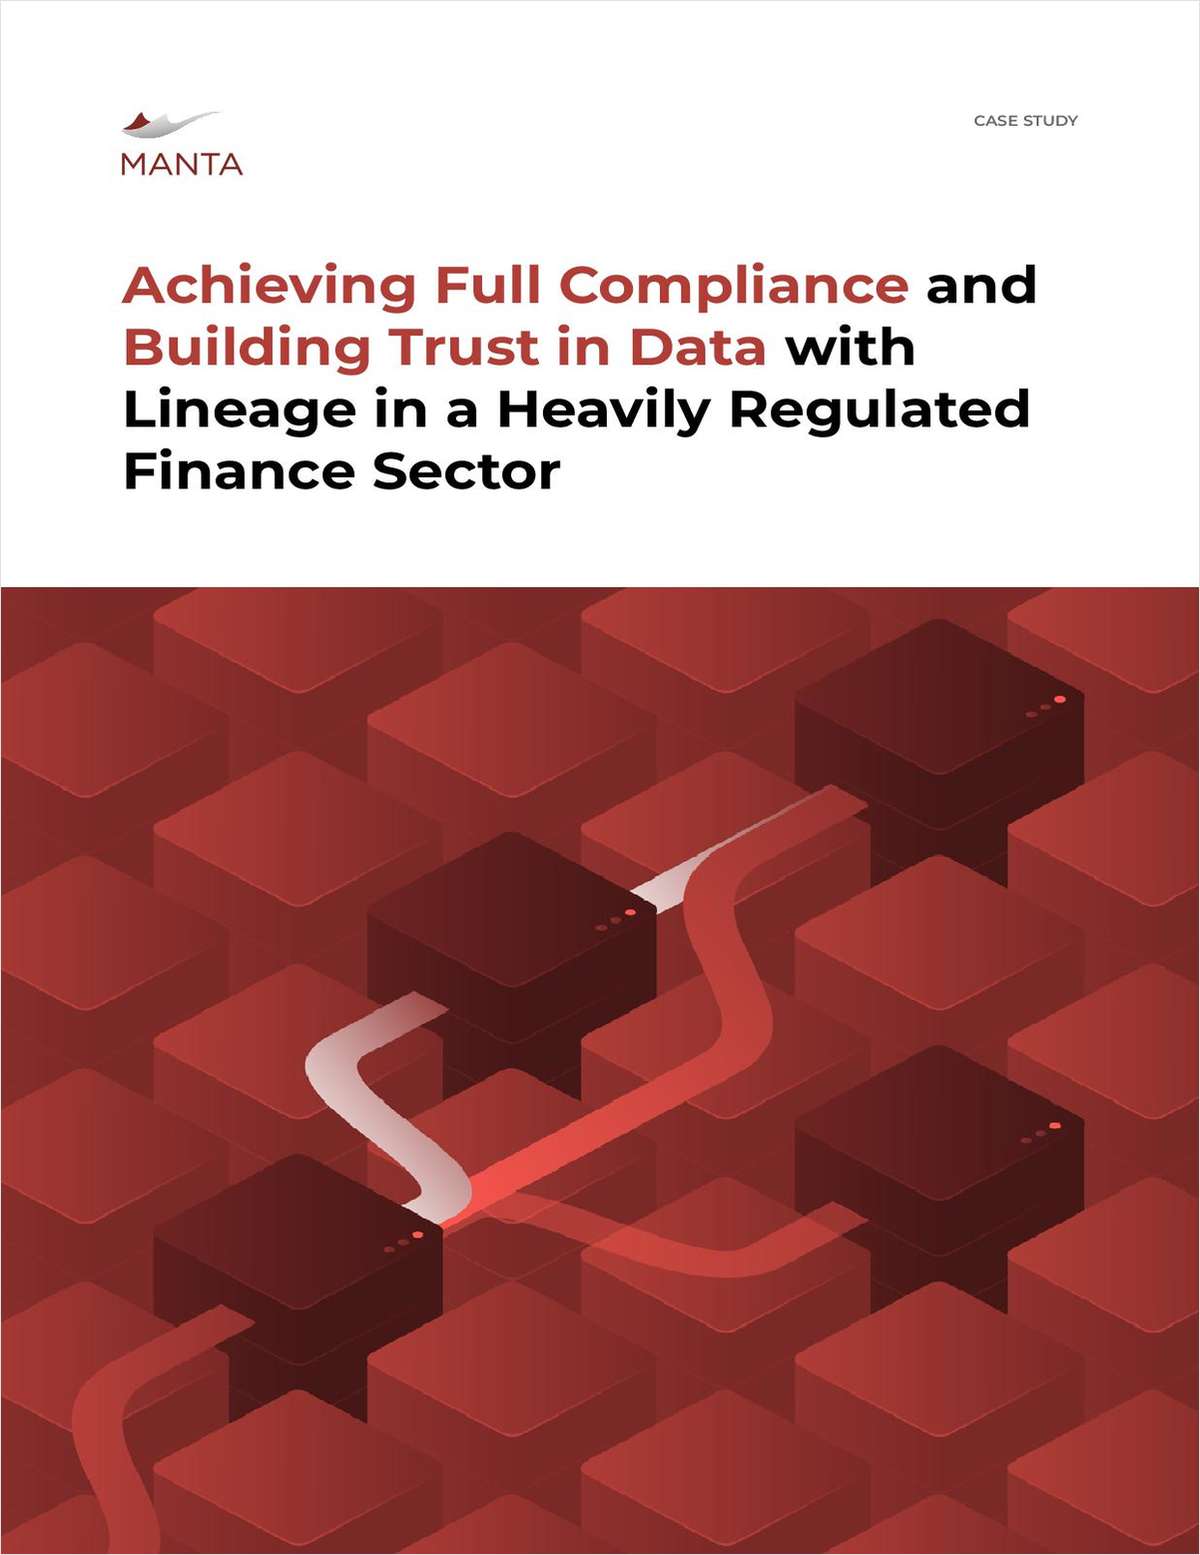 Achieving Full Compliance and Building Trust in Data with Lineage in a Heavily Regulated Finance Sector